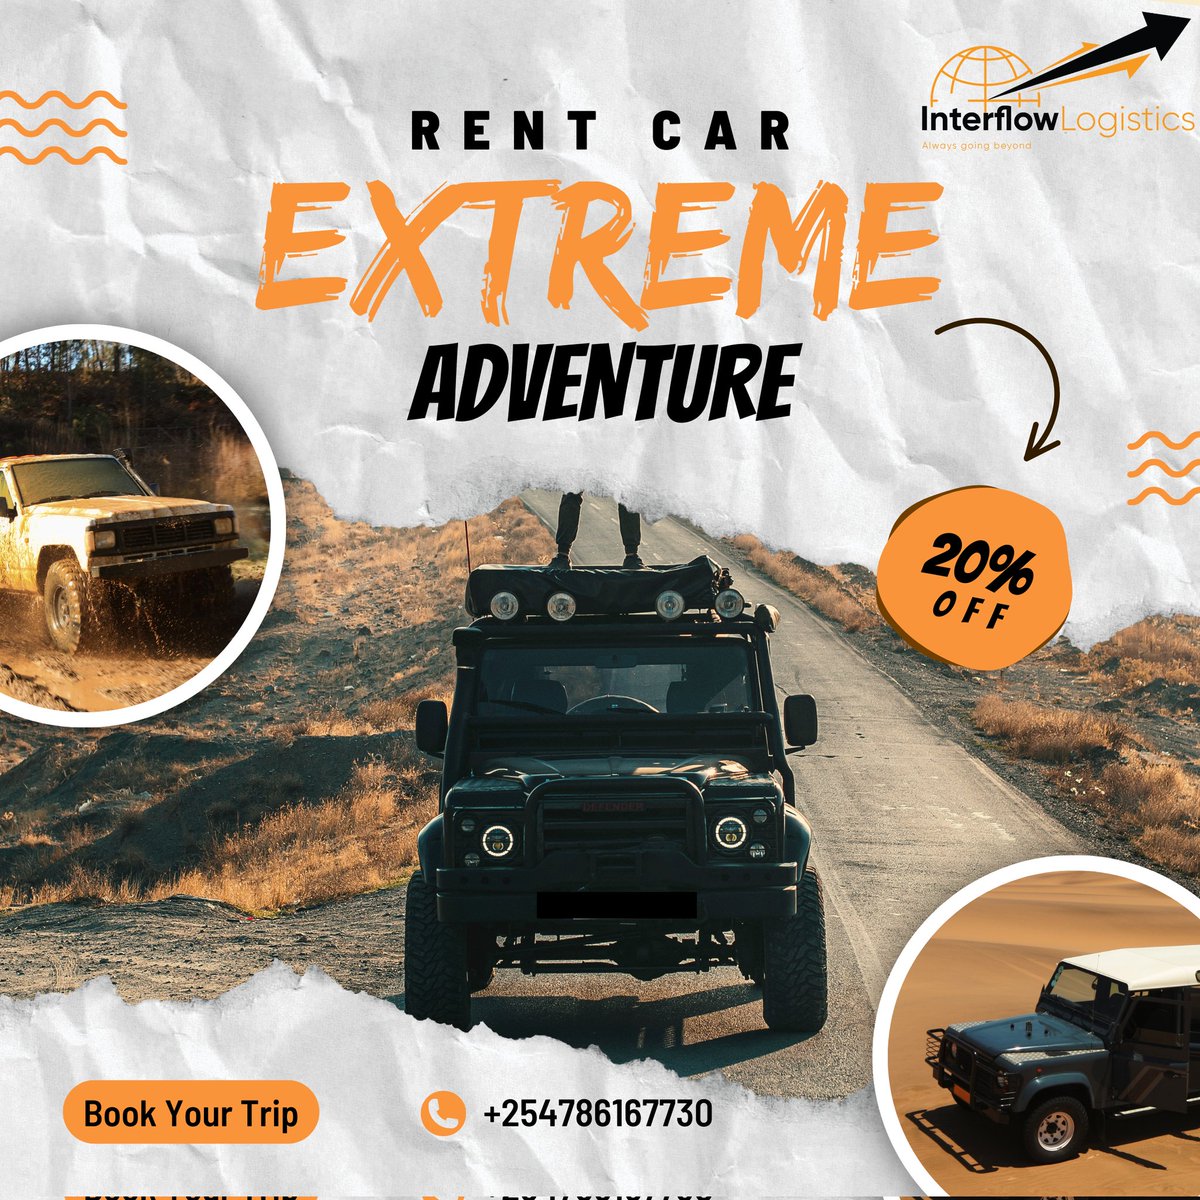 Adventure awaits! 🚗💨 Whether you're a thrill-seeker or a nature lover, our car rental services have got you covered. Explore the great outdoors in style and comfort. Book your extreme adventure now! #Interflow Logistics #CarRental #AdventureTime #explore#AIL